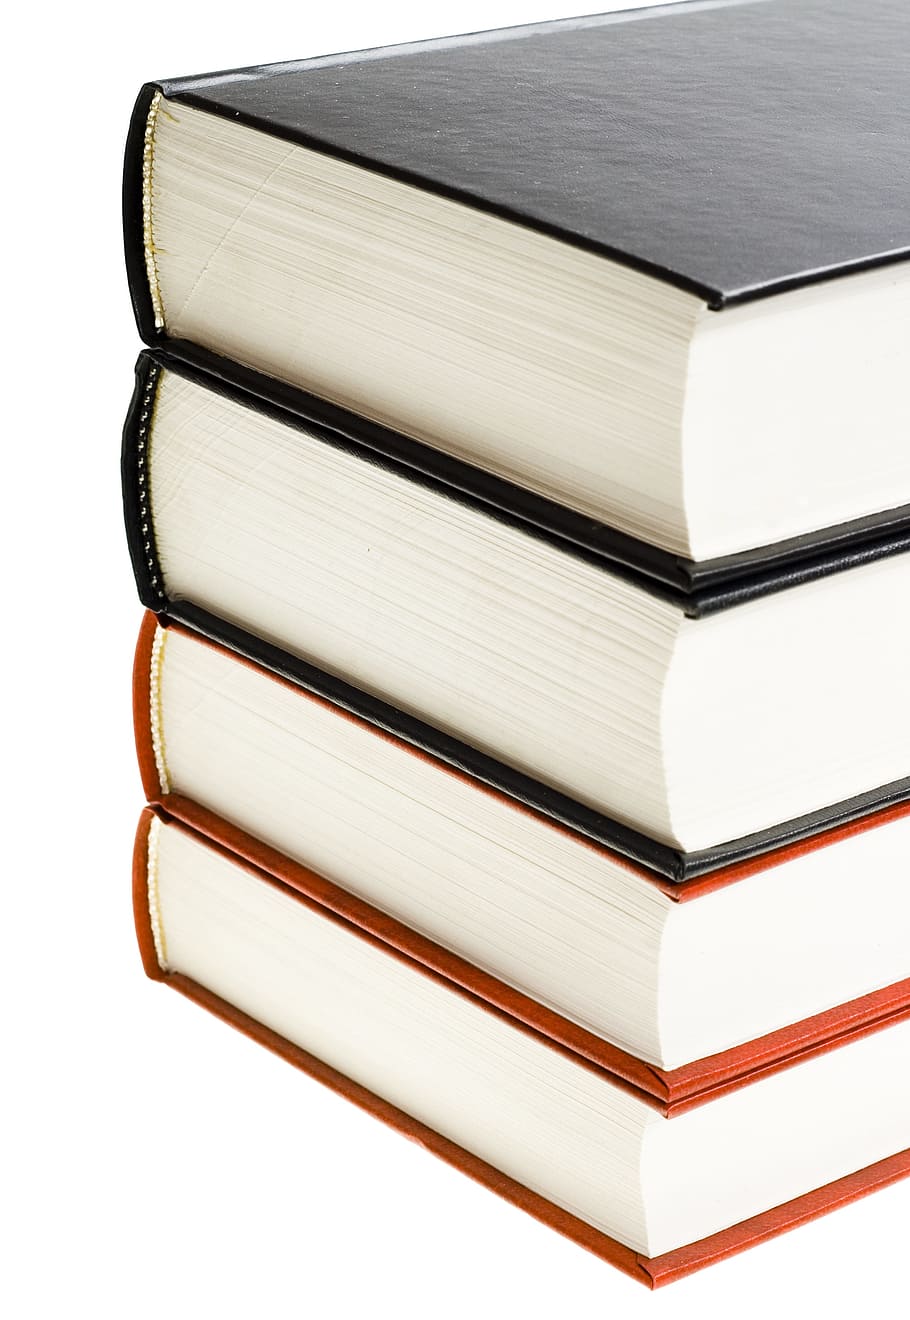 books, close-up, paper, stacked, read, learning, education, publication, book, white background